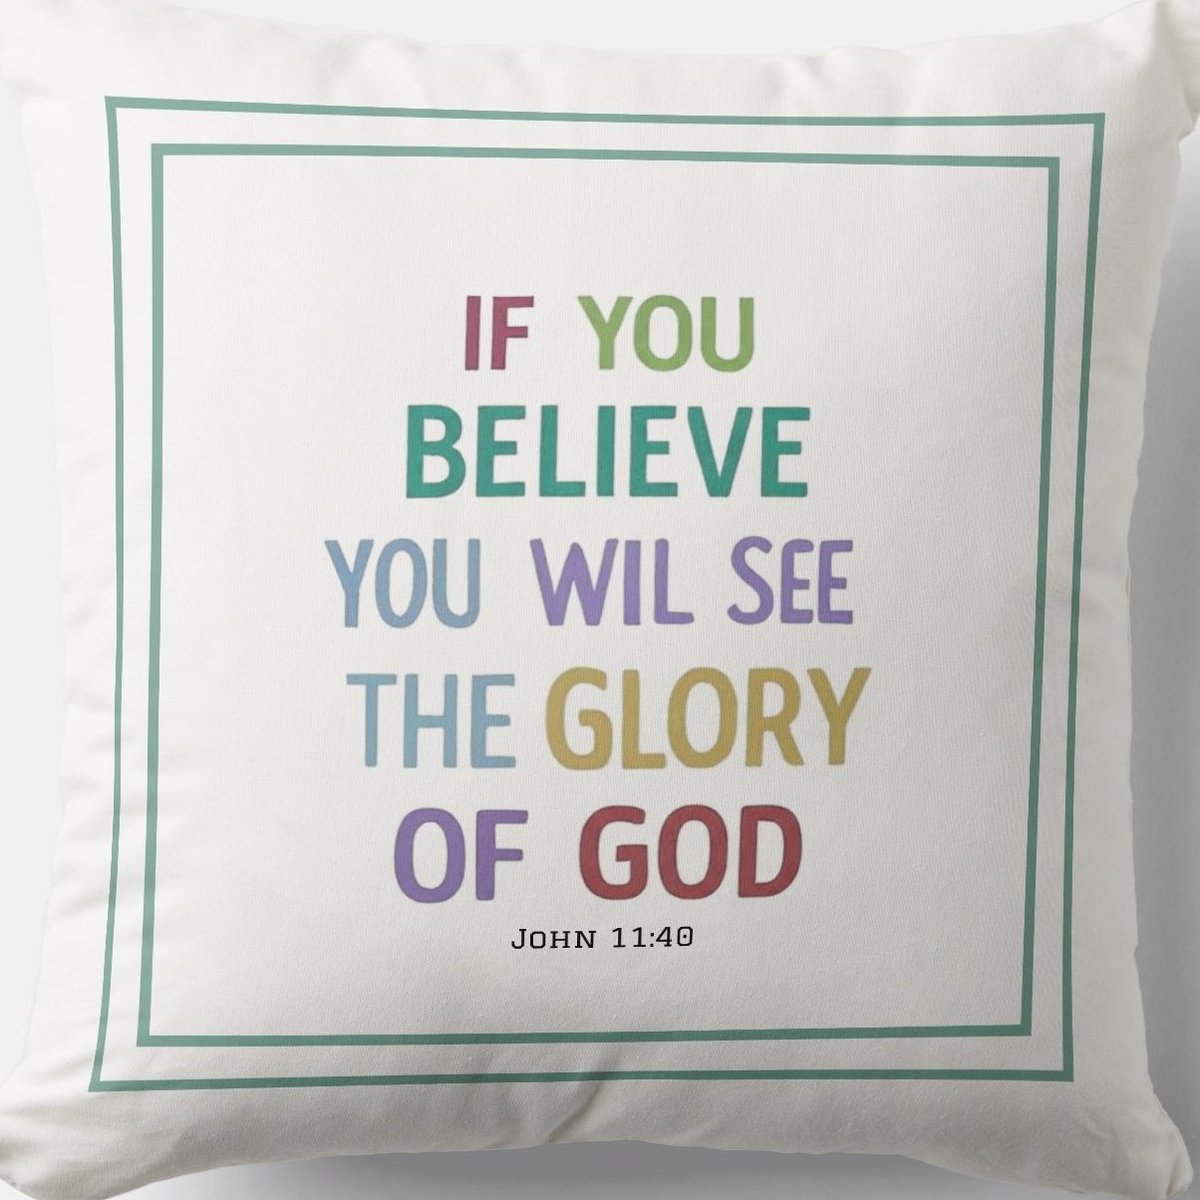 If You #Believe You Will See The #Glory Of God zazzle.com/if_you_believe… #Pillow #Blessing #JesusChrist #JesusSaves #Jesus #christian #spiritual #Homedecoration #uniquegift #giftideas #giftforhim #giftidea #HolySpirit #pillows #giftshop #giftsforher #giftsforfriend #faith #hope #GN